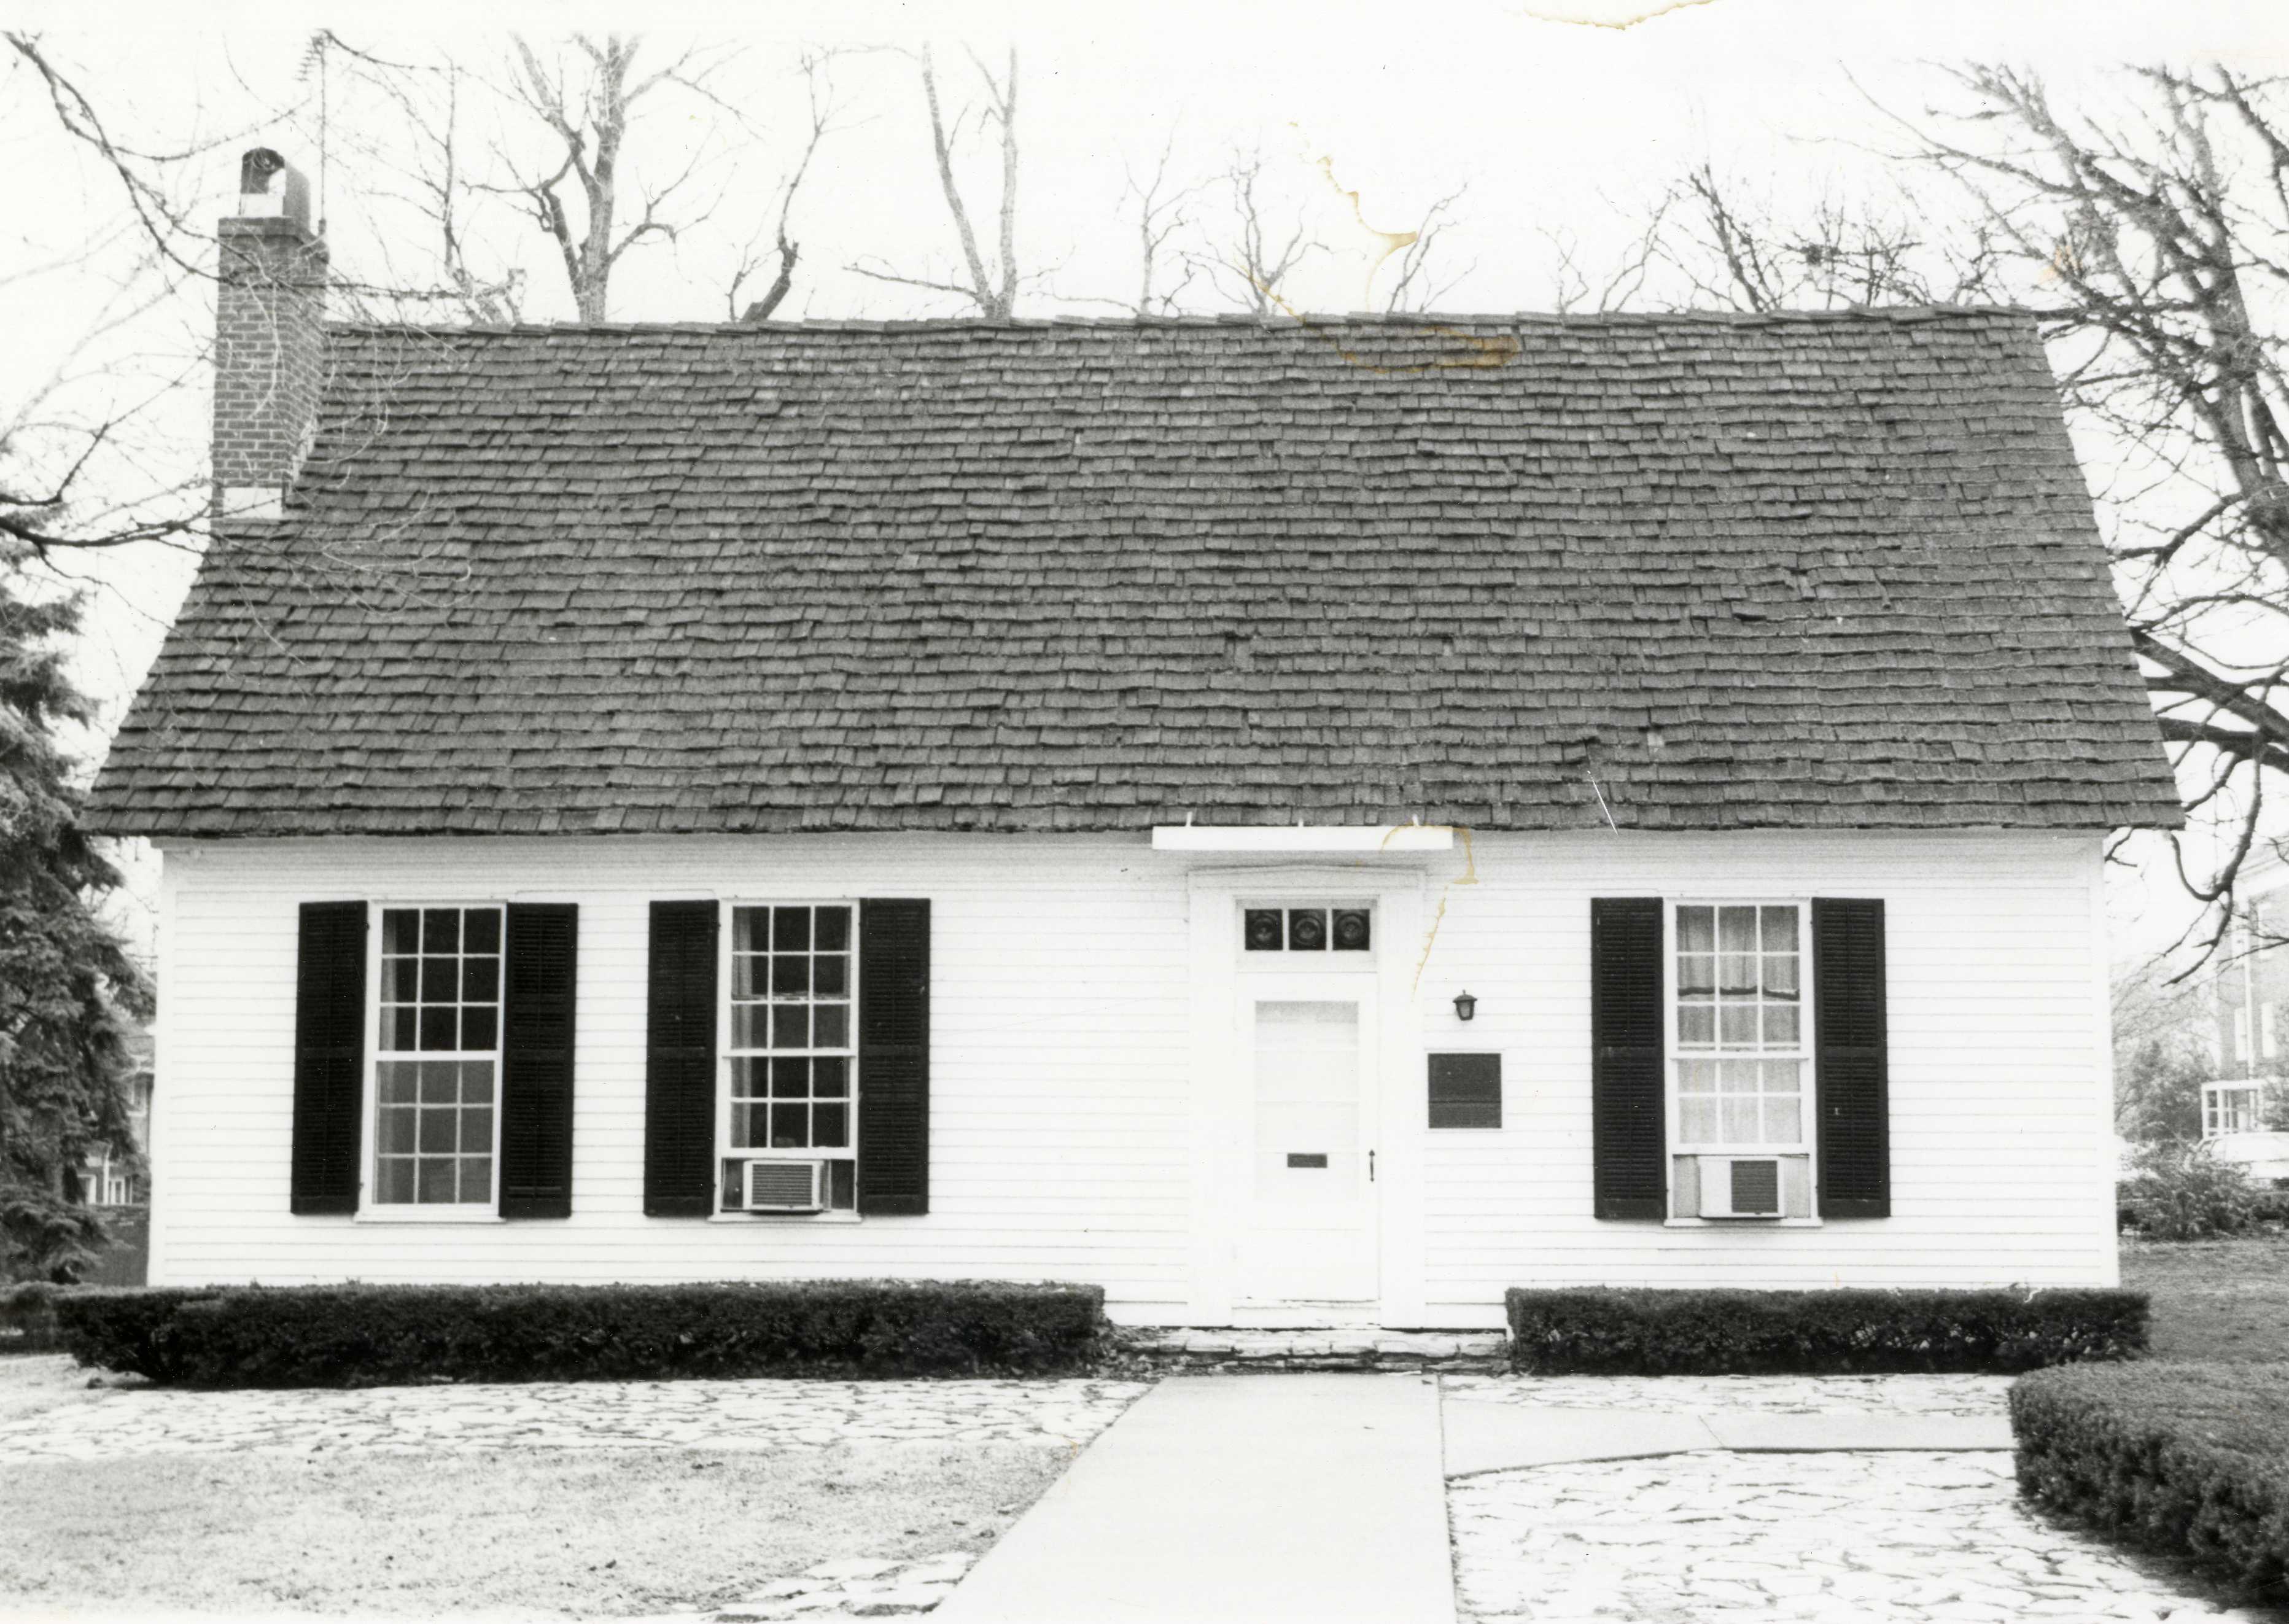 Hovey Cottage was built by Edmund O. and Mary Carter Hovey between 1836 and 1837. 